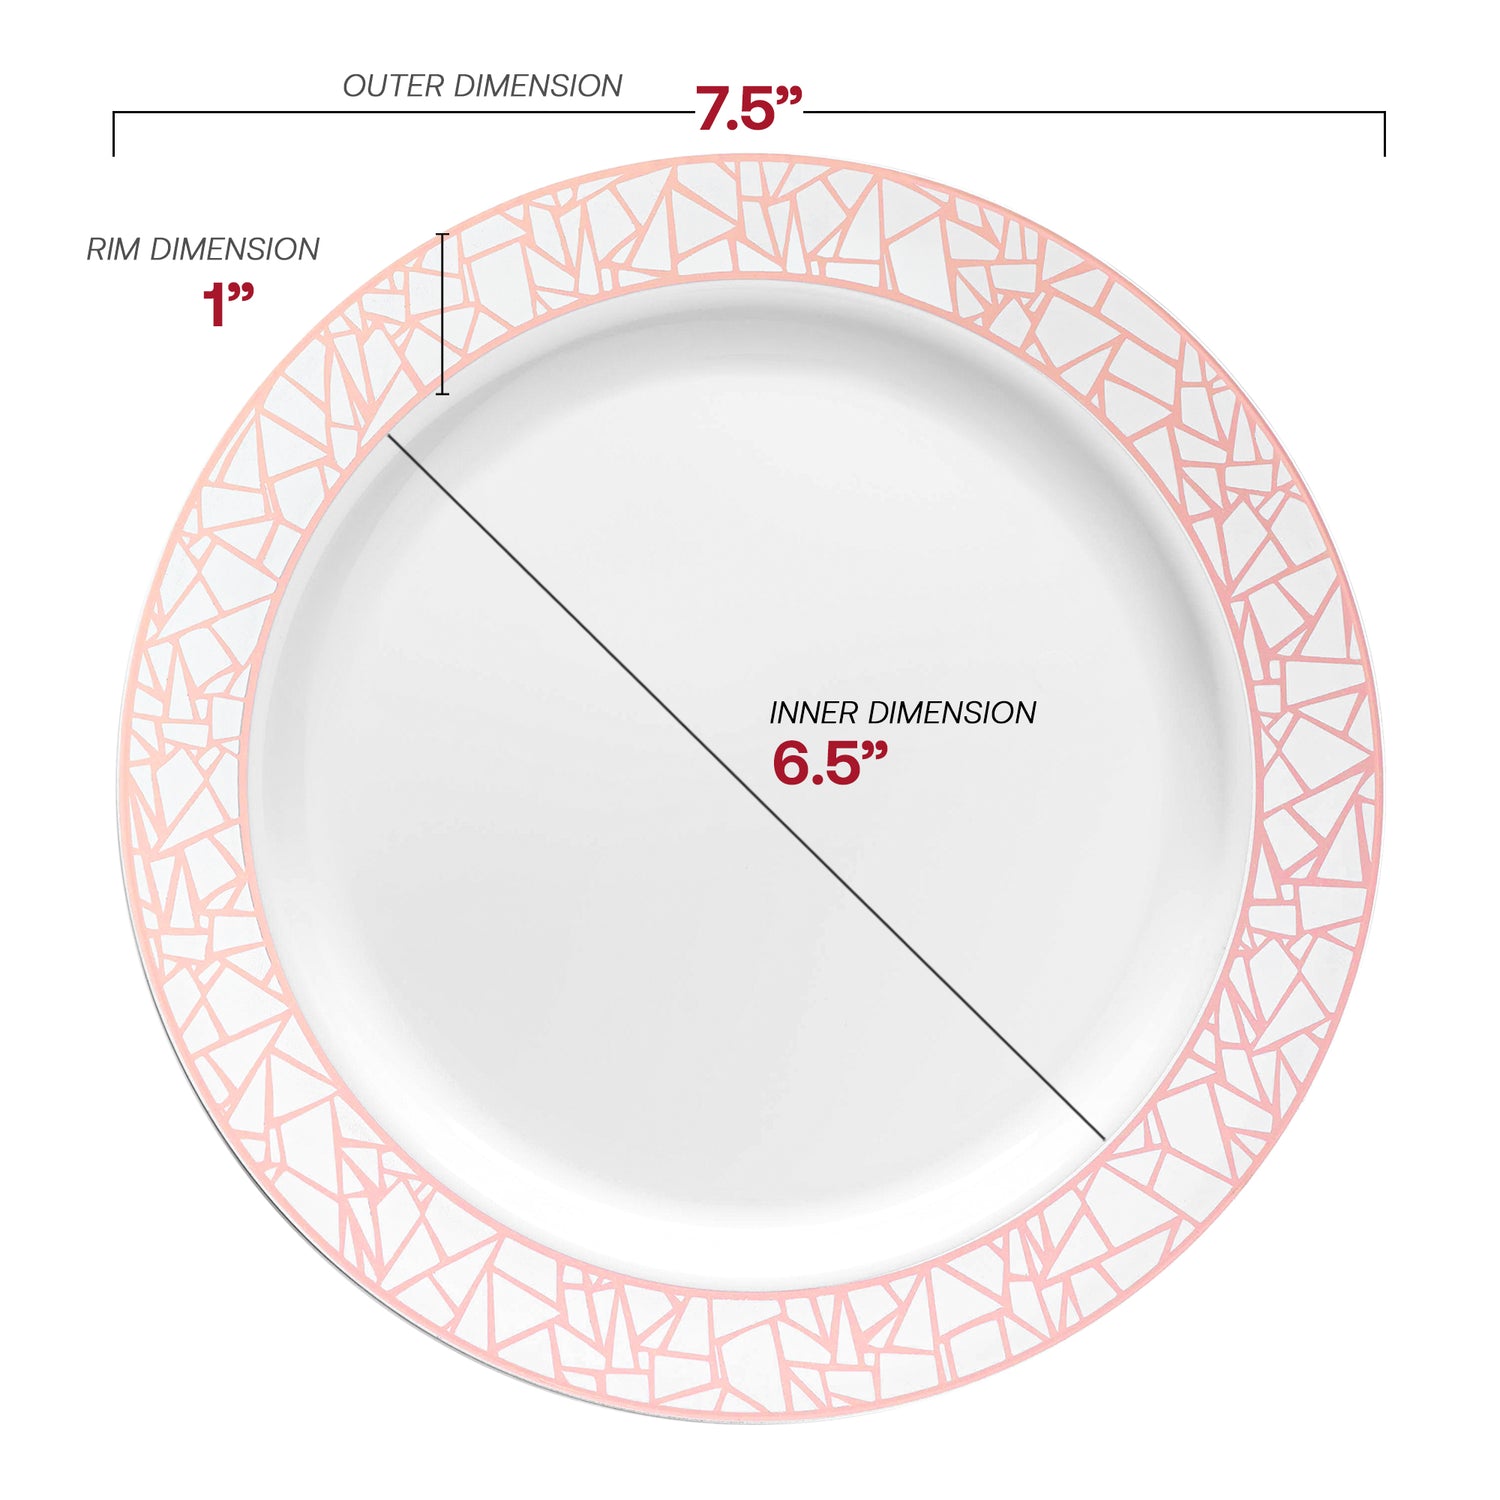 White with Silver and Rose Gold Mosaic Rim Round Plastic Appetizer/Salad Plates (7.5") Dimension| The Kaya Collection